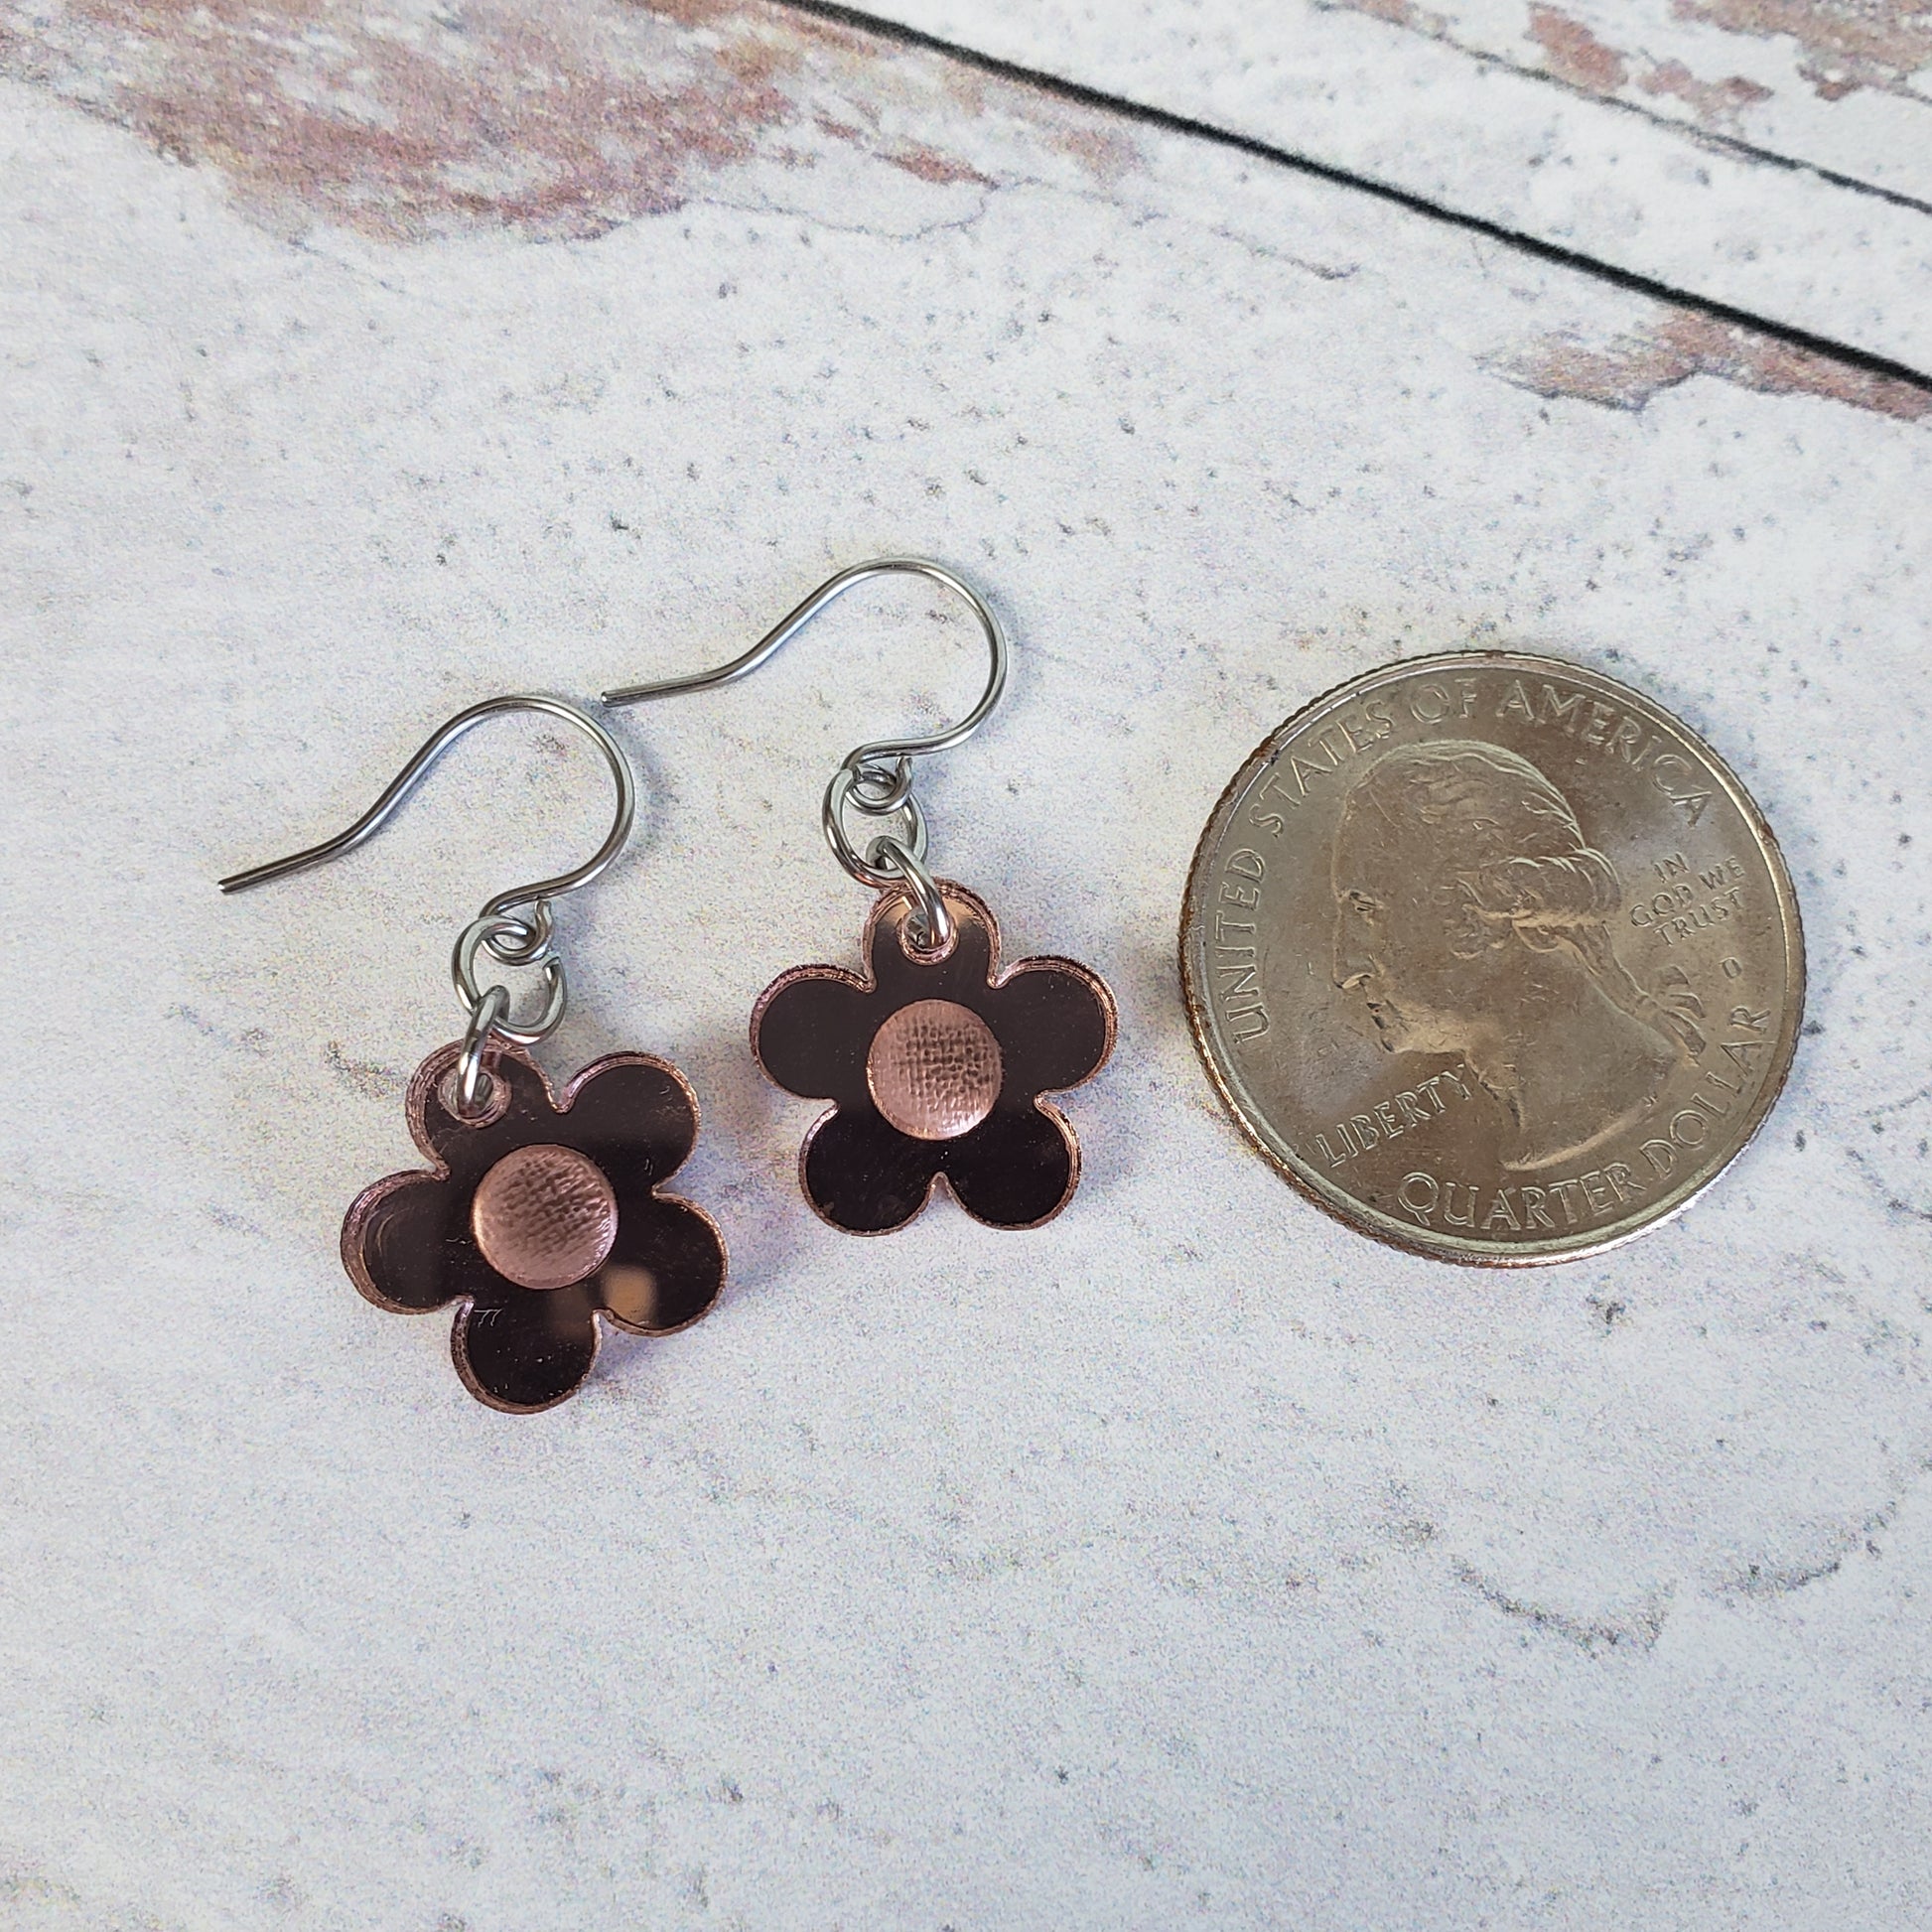 Rose gold mirror daisy earrings on stainless steel earring wires next to quarter for size reference.